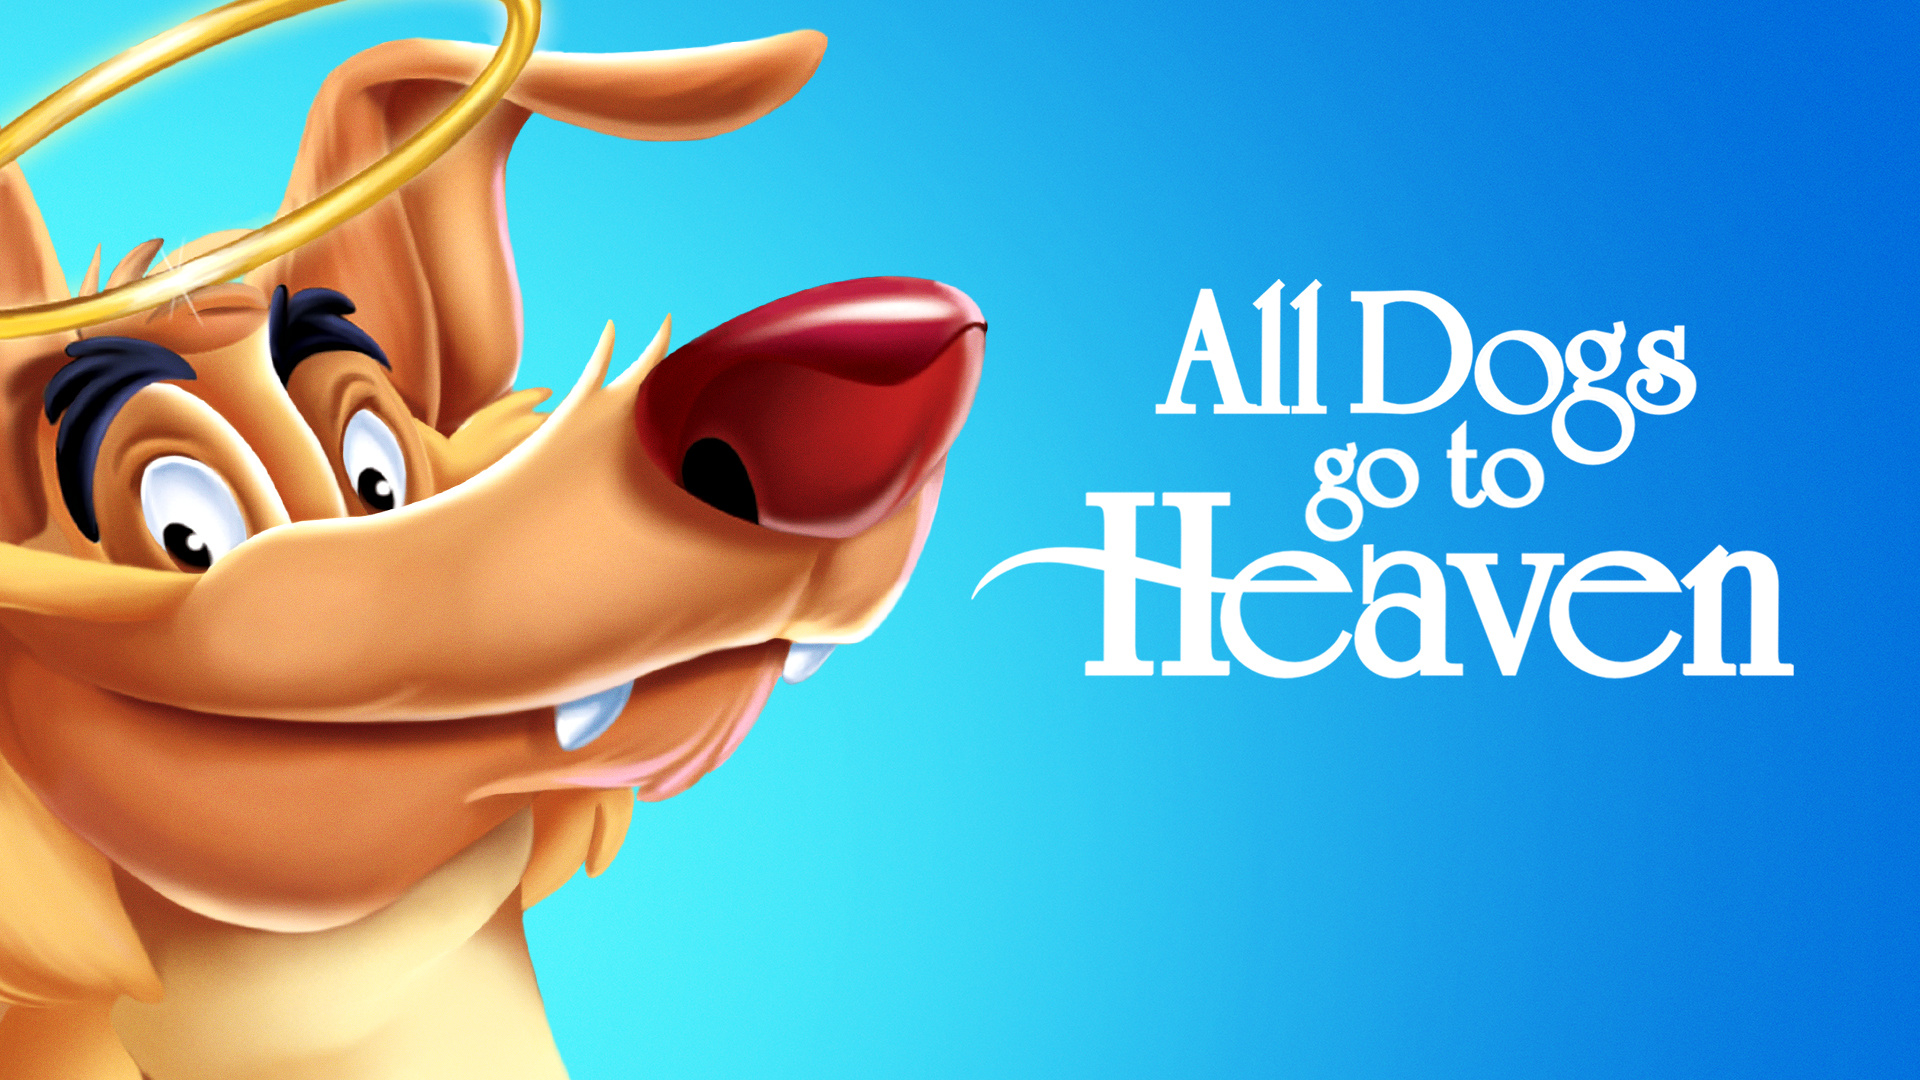 All Dogs Go to Heaven, 26 wallpapers, Animation, 1920x1080 Full HD Desktop